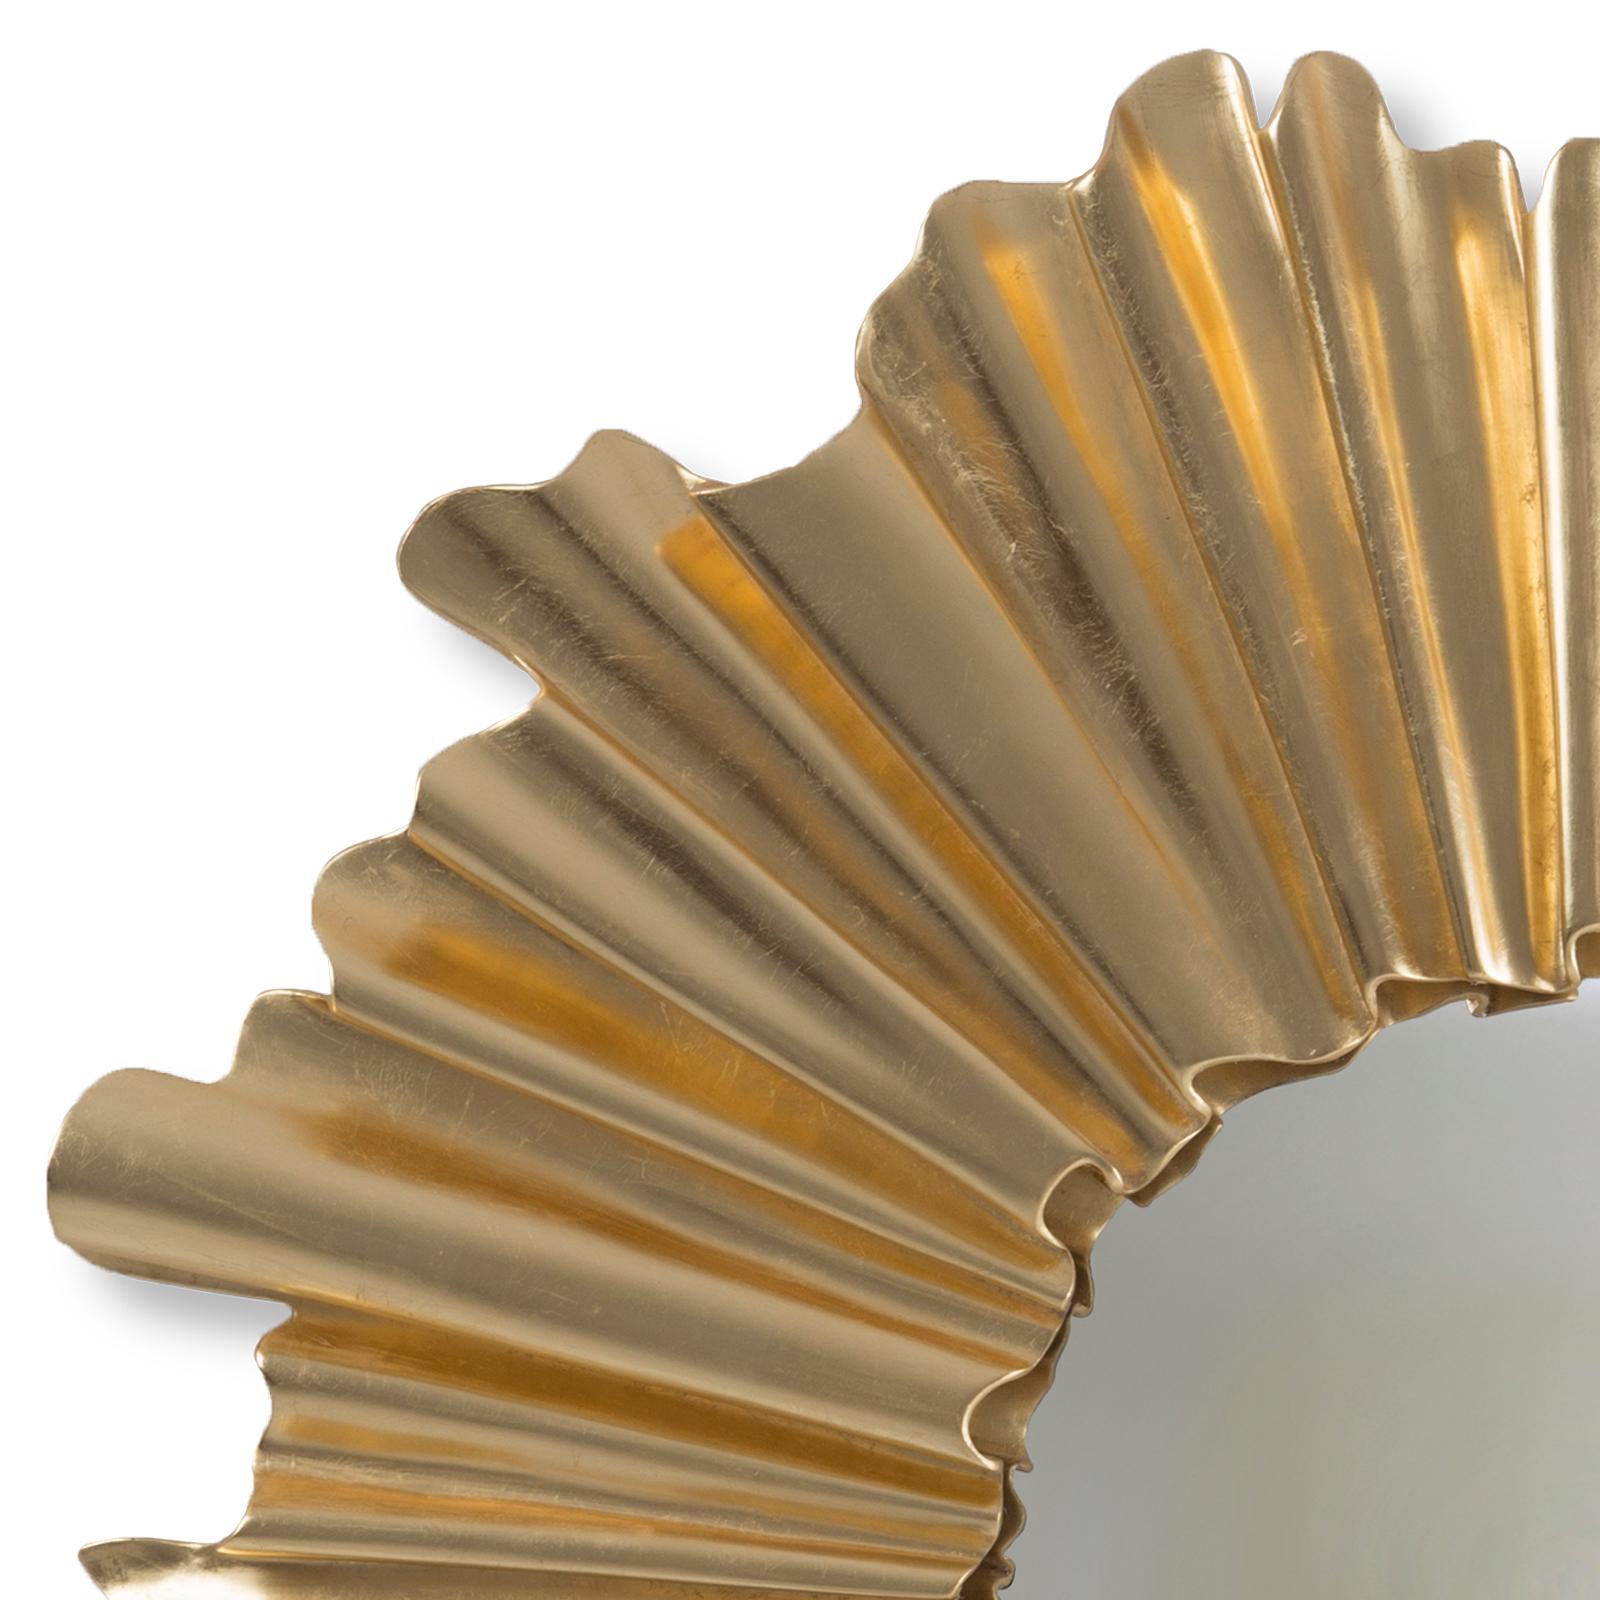 Mirror fluted gold in hand-carved solid
mahogany wood. With gold paint and with
center convex mirror. Also available with
antique silver paint.